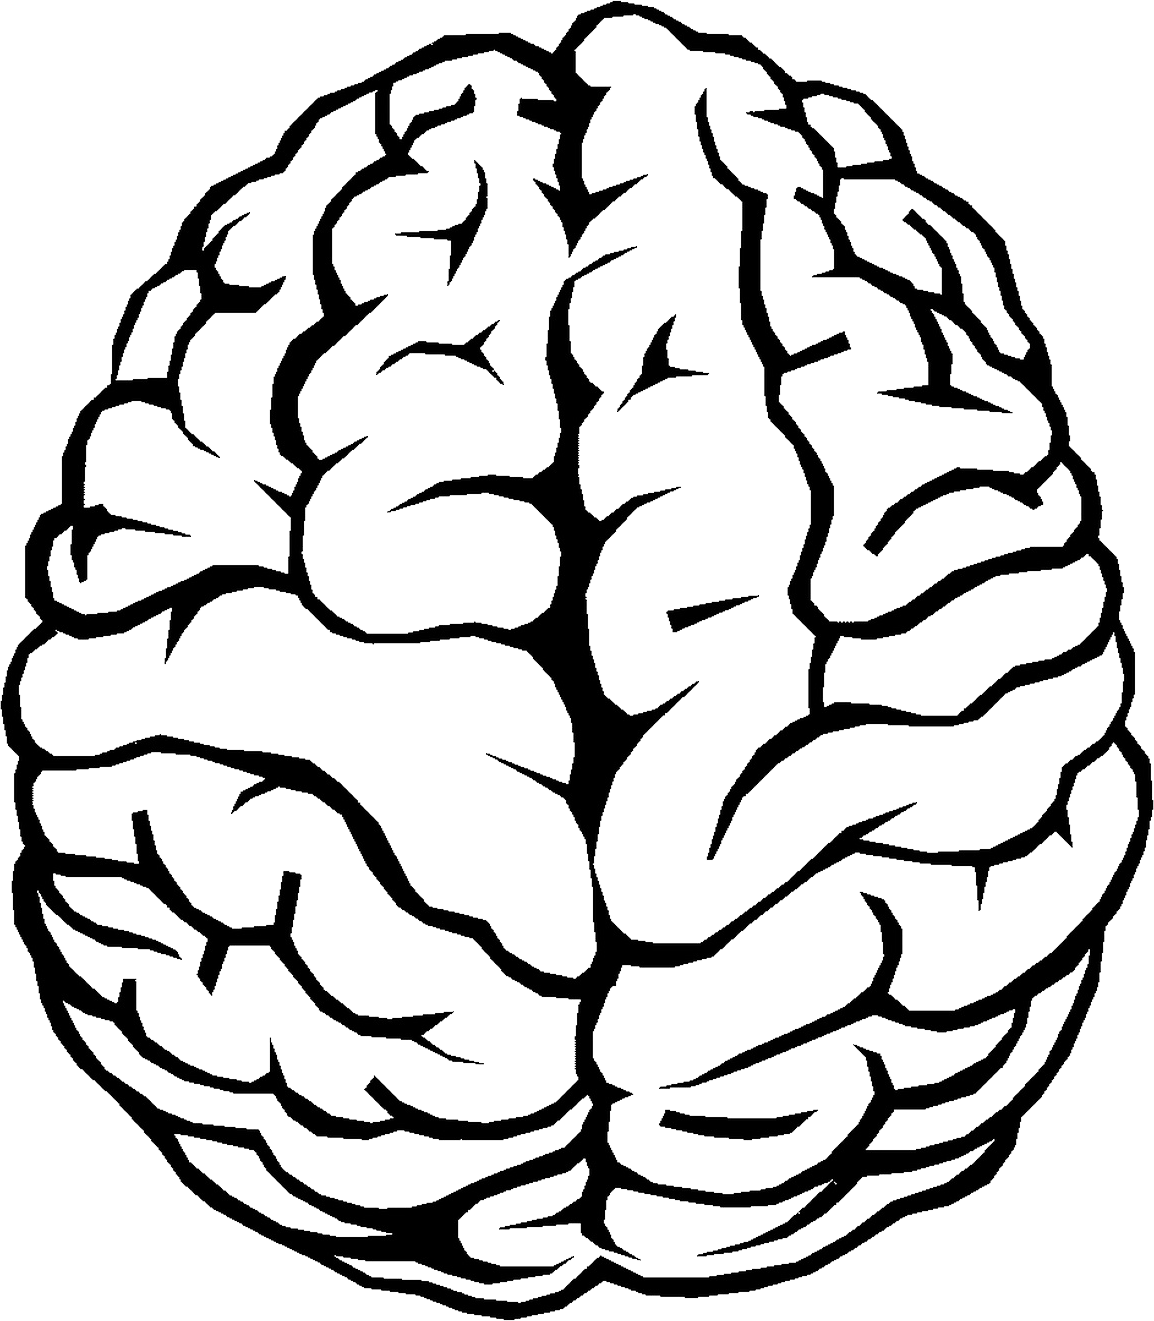 Outline Of The Human Brain Clip Art - Outline Of The Human Brain Clip Art (1154x1321)